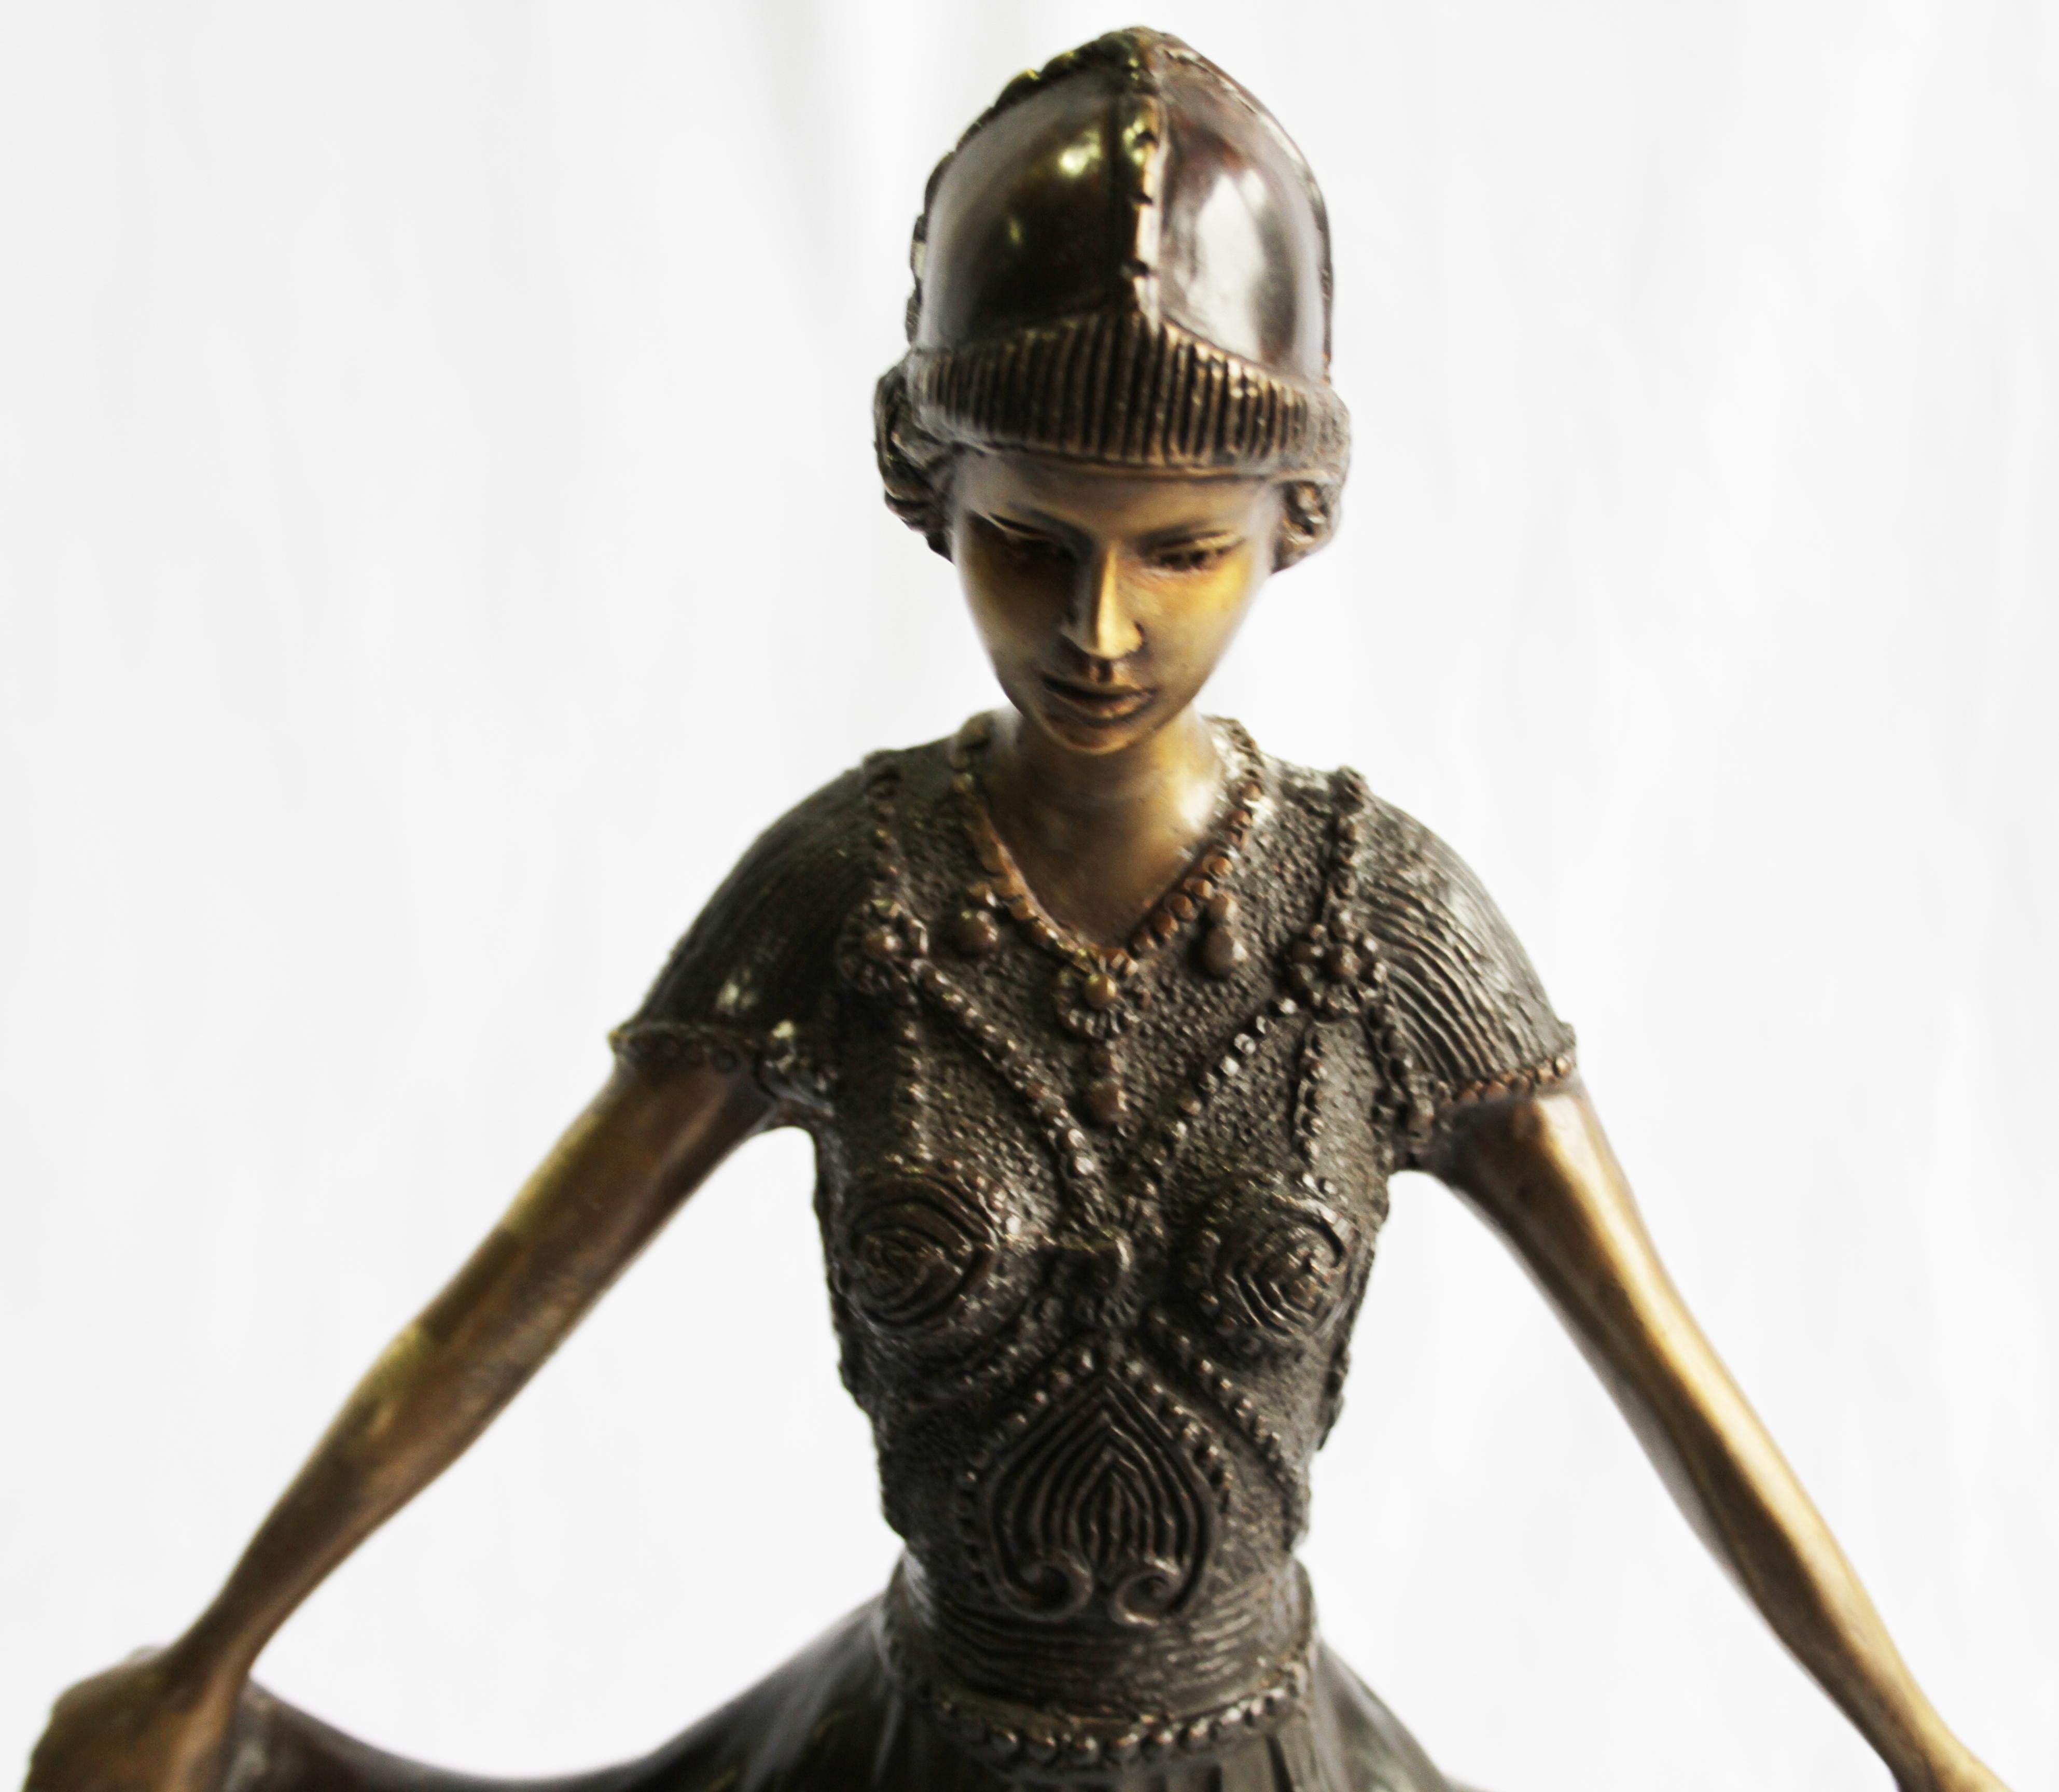 After Demetre Chiparus. An Art Deco style bronze of a dancer, mid-20th century. Dark and gold brown patination. On a circular base.

Demétre Haralamb Chiparus was a Romanian Art Deco era sculptor who lived and worked in Paris, France. He was one of